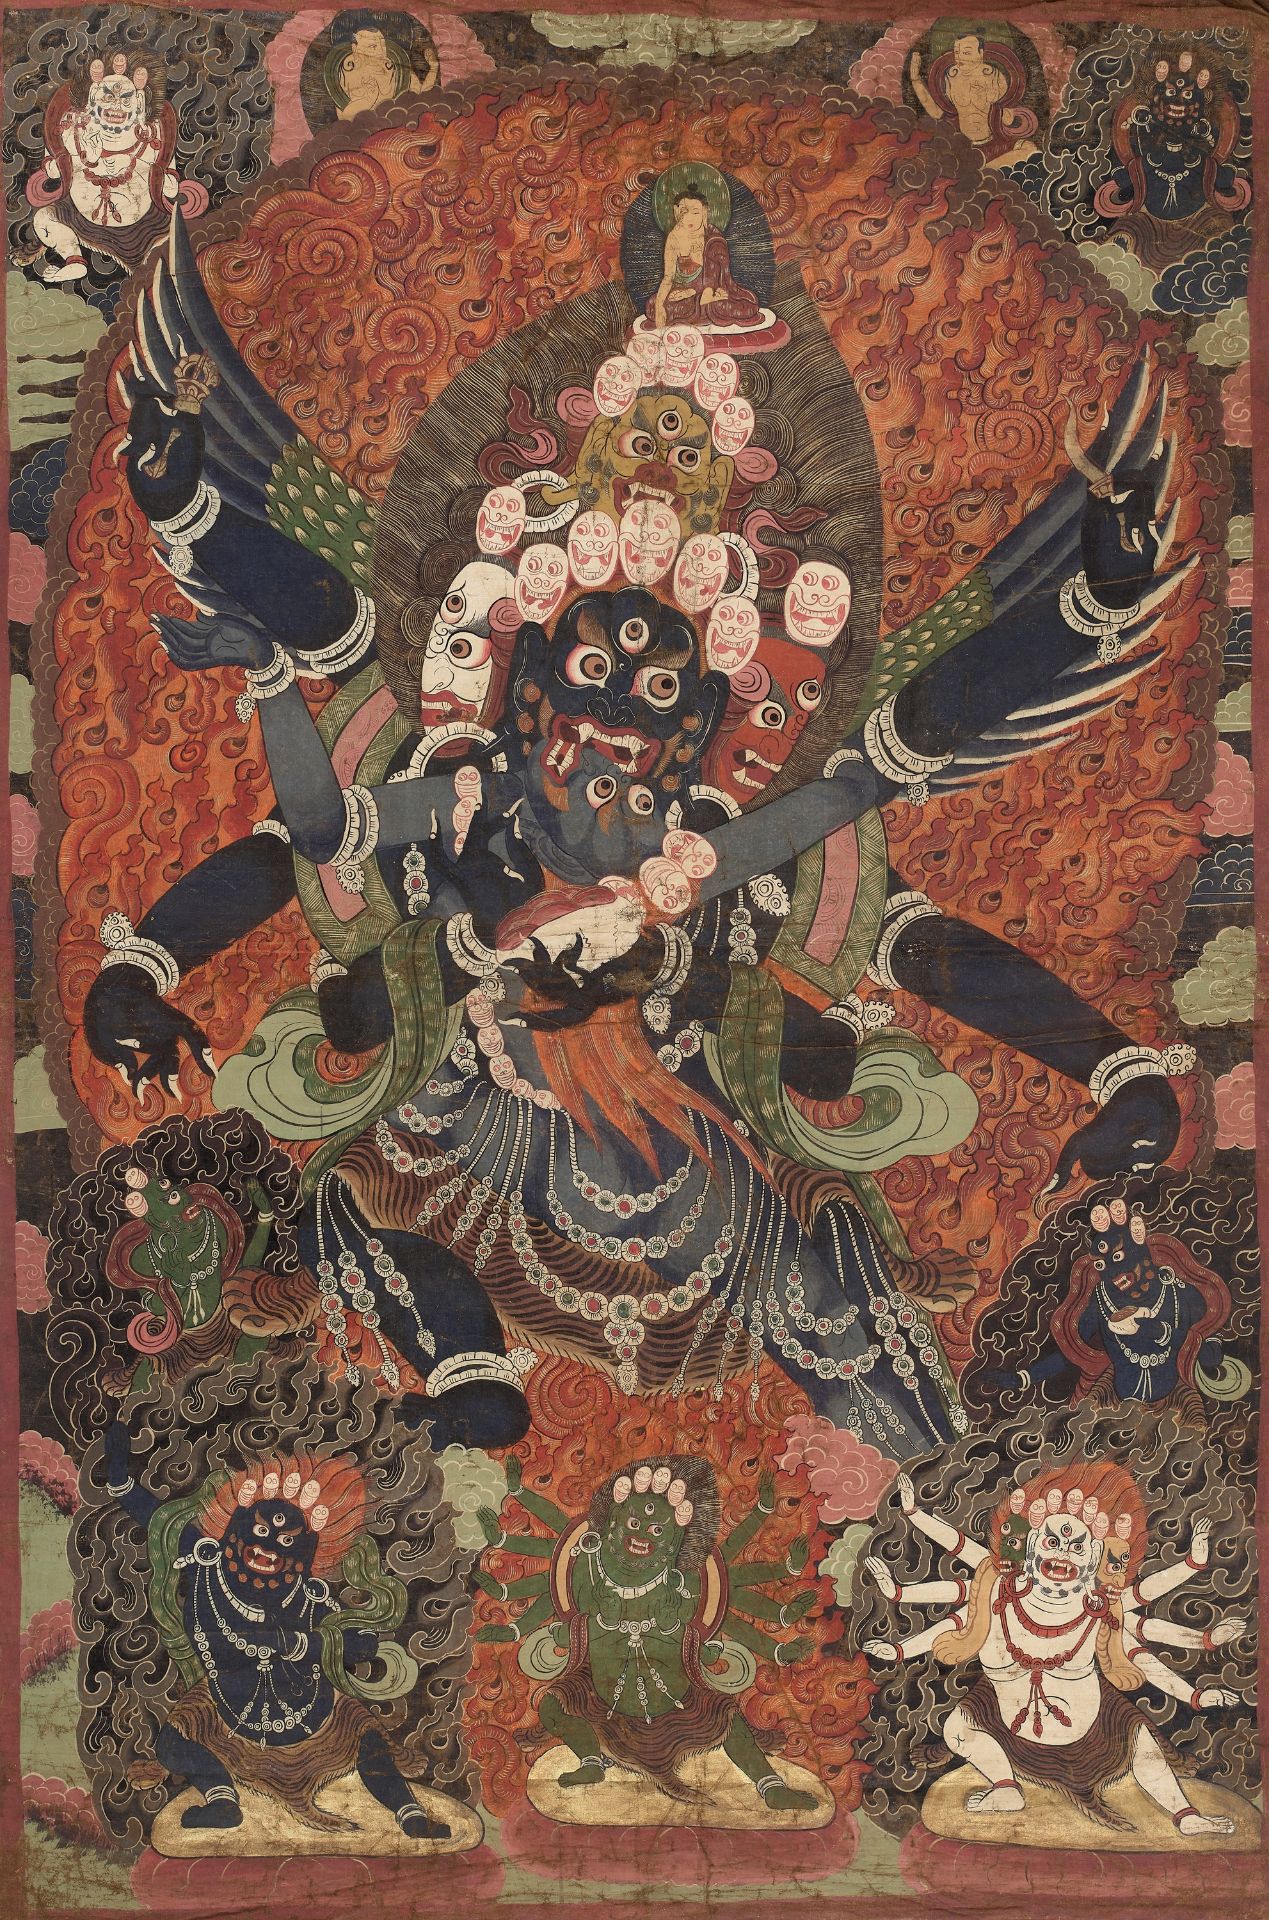 A VERY LARGE THANGKA OF A HERUKA AND CONSORT, TIBET, 18TH-19TH CENTURY